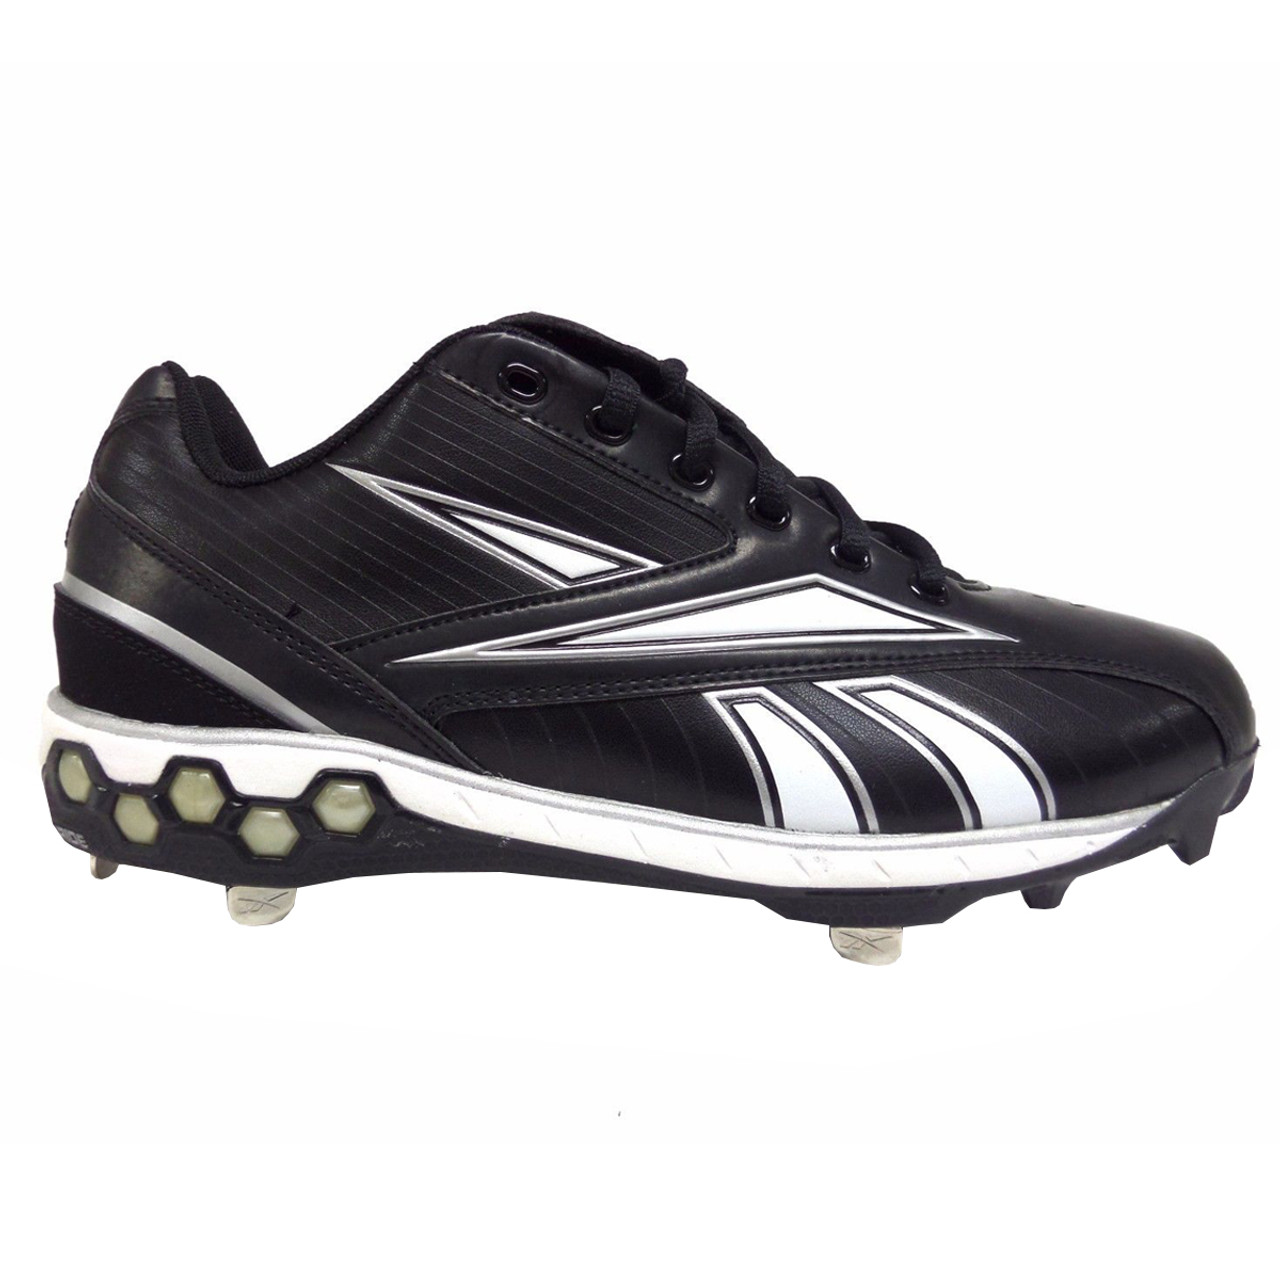 reebok youth cleats - 53% OFF 